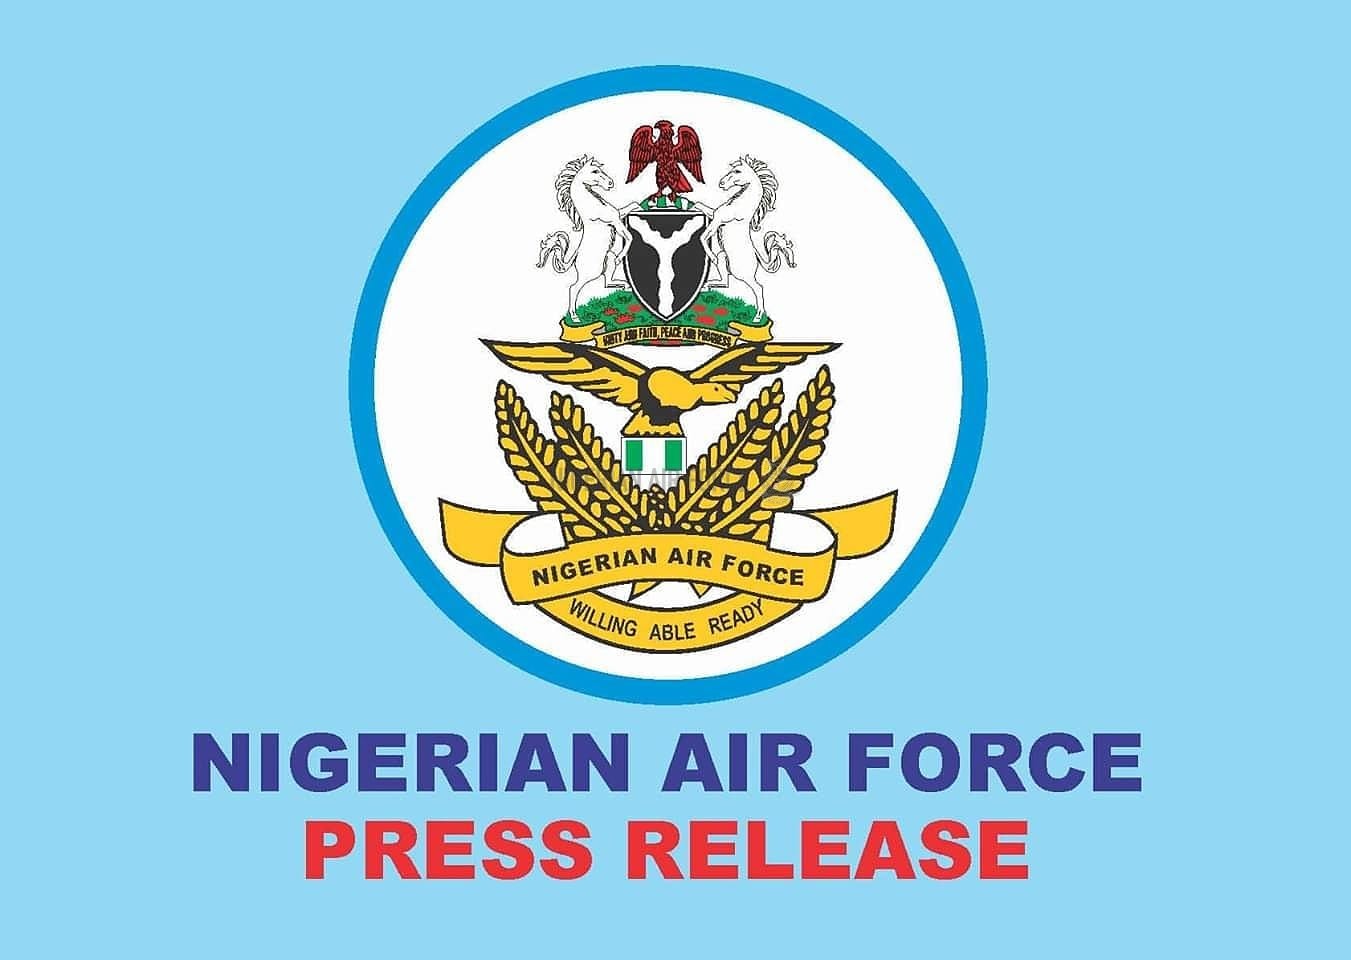 UPDATE ON AIR ACCIDENT INVOLVING NIGERIAN AIR FORCE AIRCRAFT